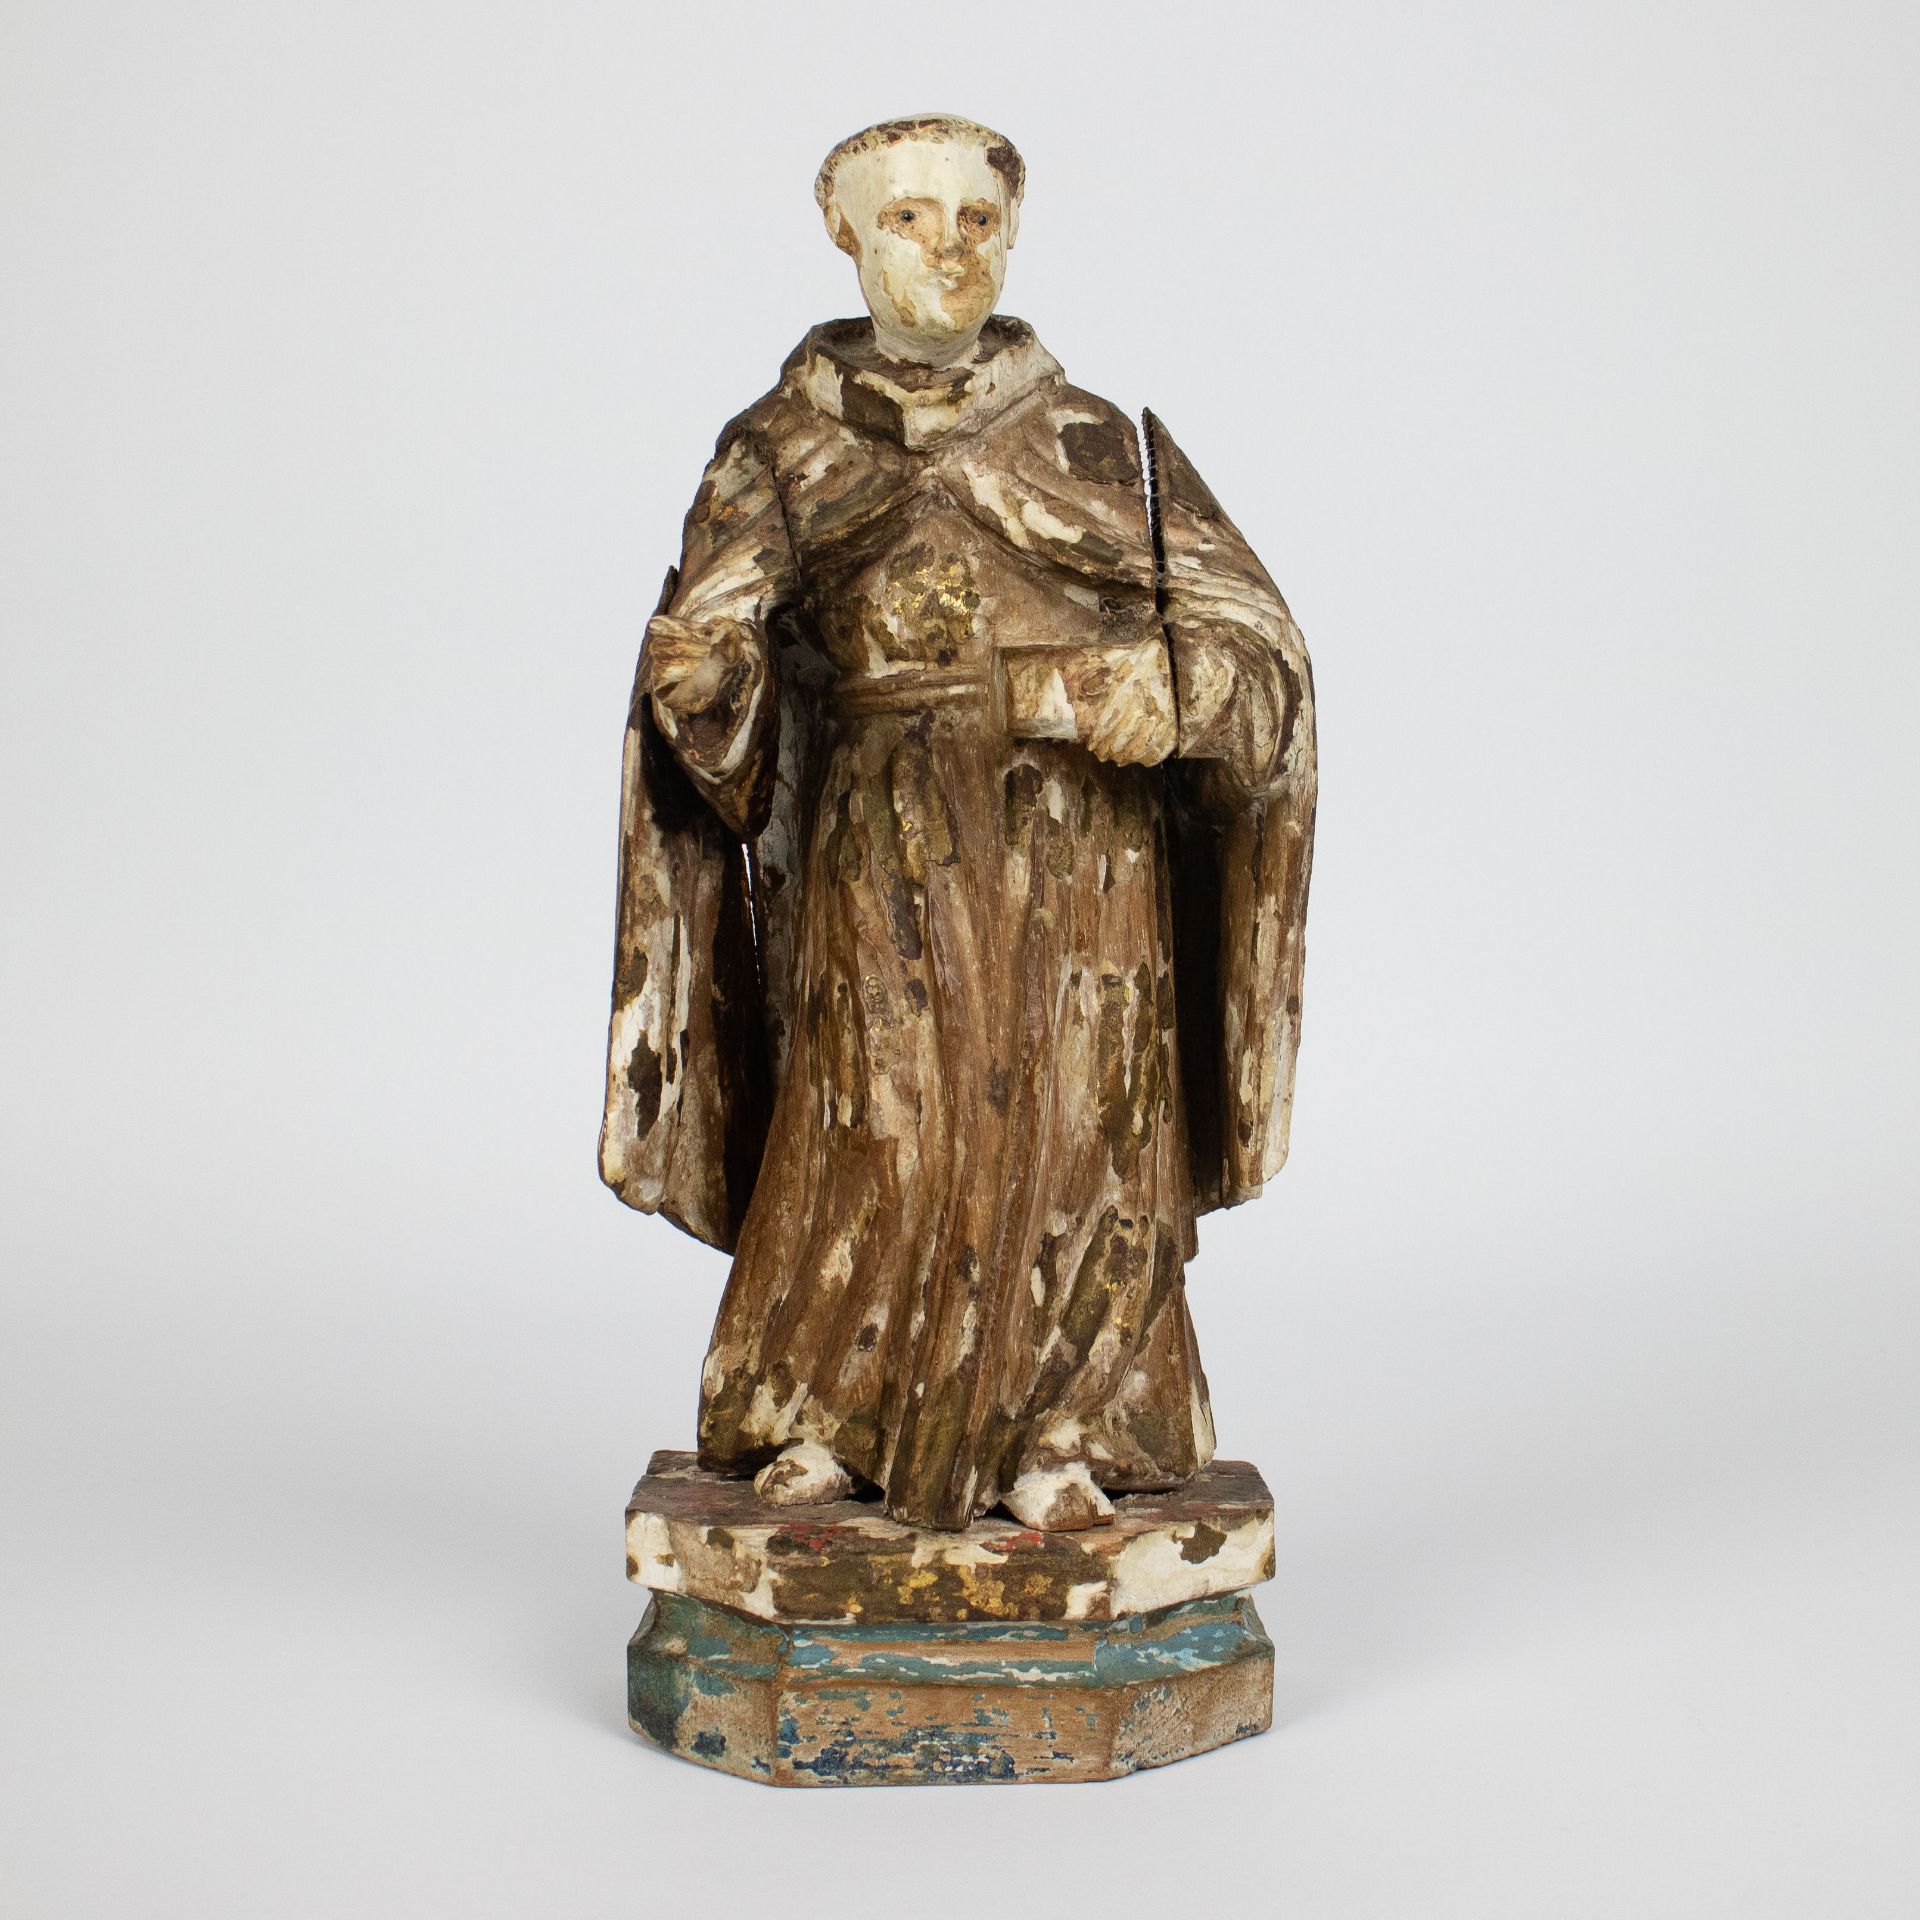 A wooden holy figure with polychromy